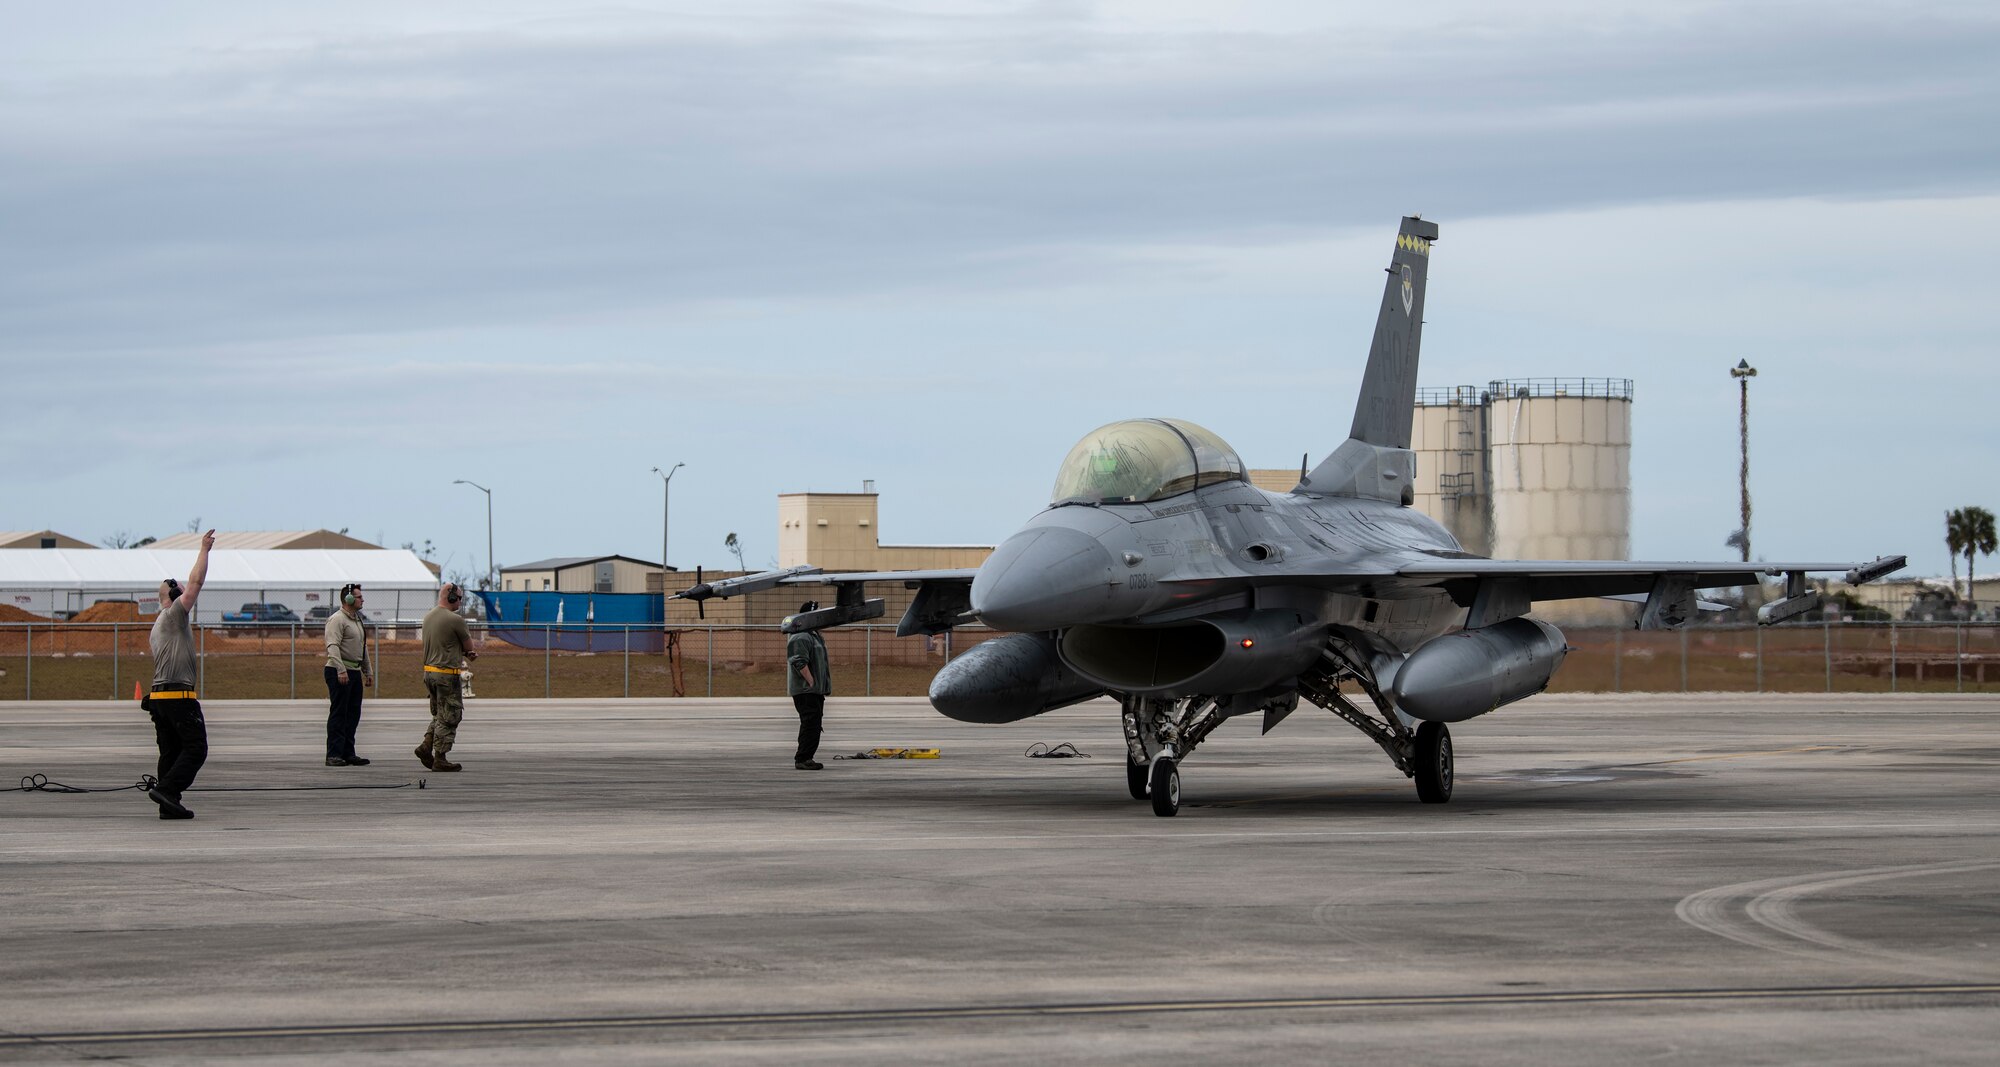 A U.S. Air Force F-16 Fighting Falcon from Holloman Air Force Base, N.M., prepares to taxi after pre-flight checks for a training flight at Tyndall Air Force Base, Fla., Feb. 4, 2020. The 314th Fighter Squadron came to test their operational readiness with maintainers and pilots using live missiles. (U.S. Air Force photo by Senior Airman Stefan Alvarez)